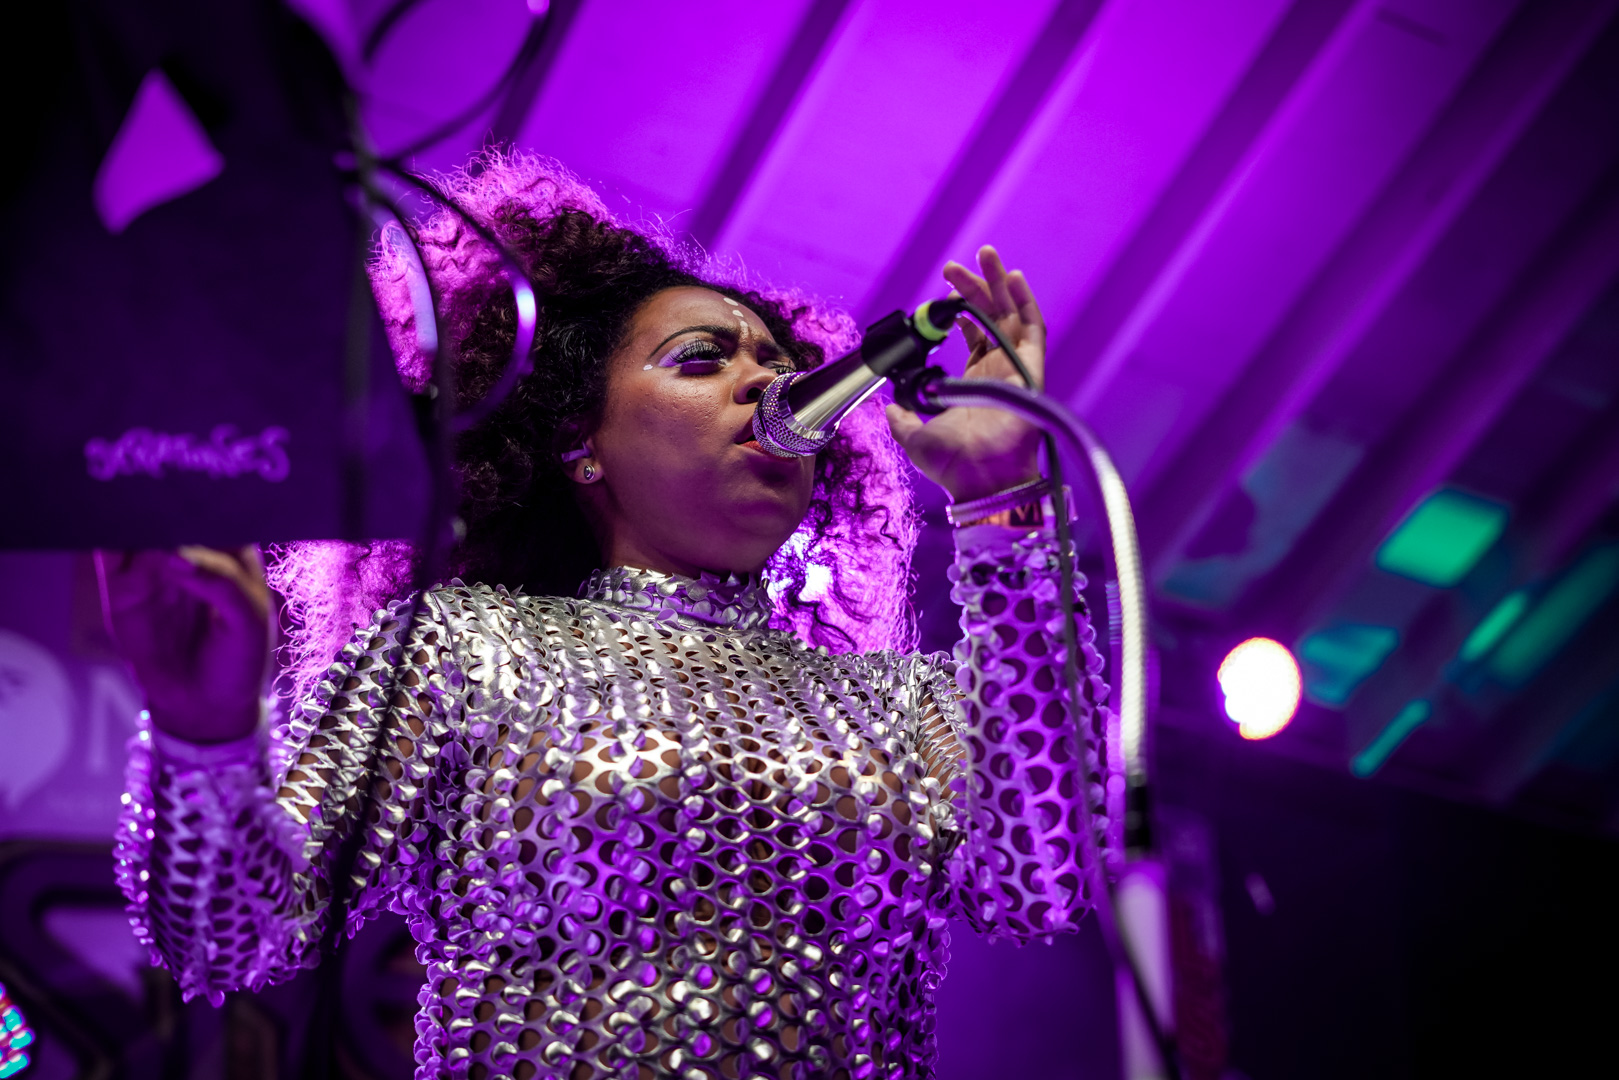 A young woman in sequin jumpsuit sings